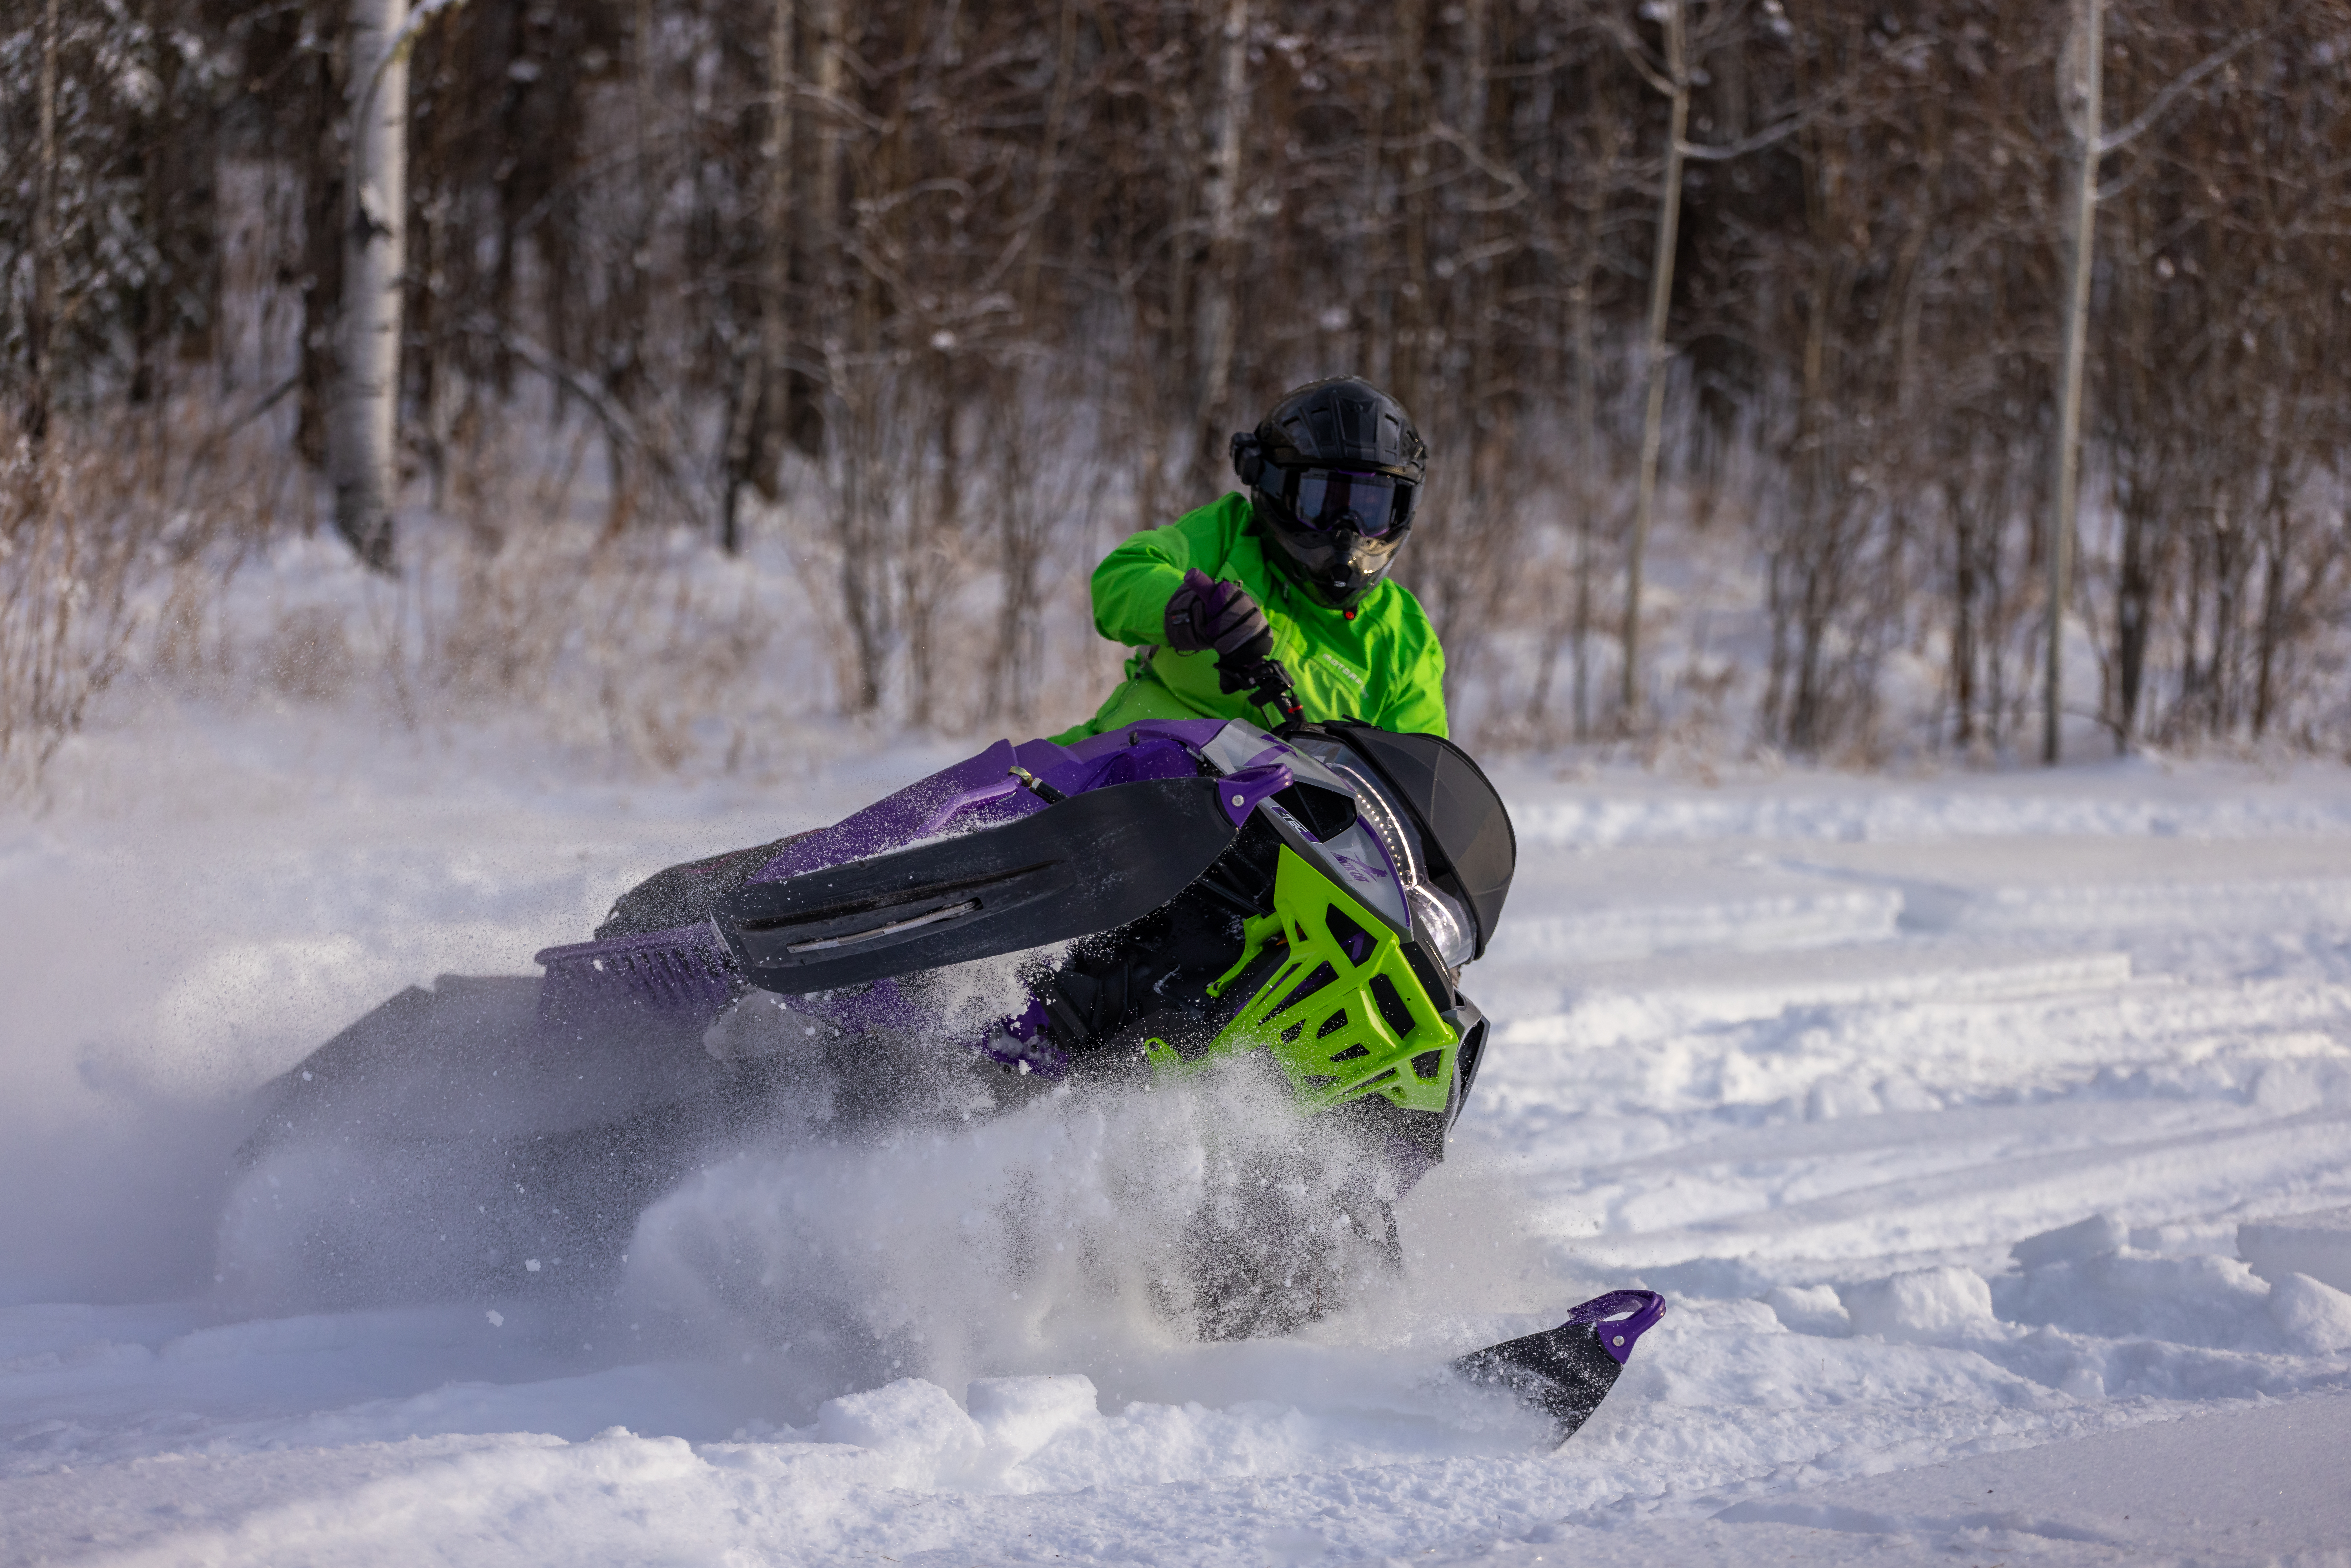 A snowmobiler cuts into the snow on a sharp turn